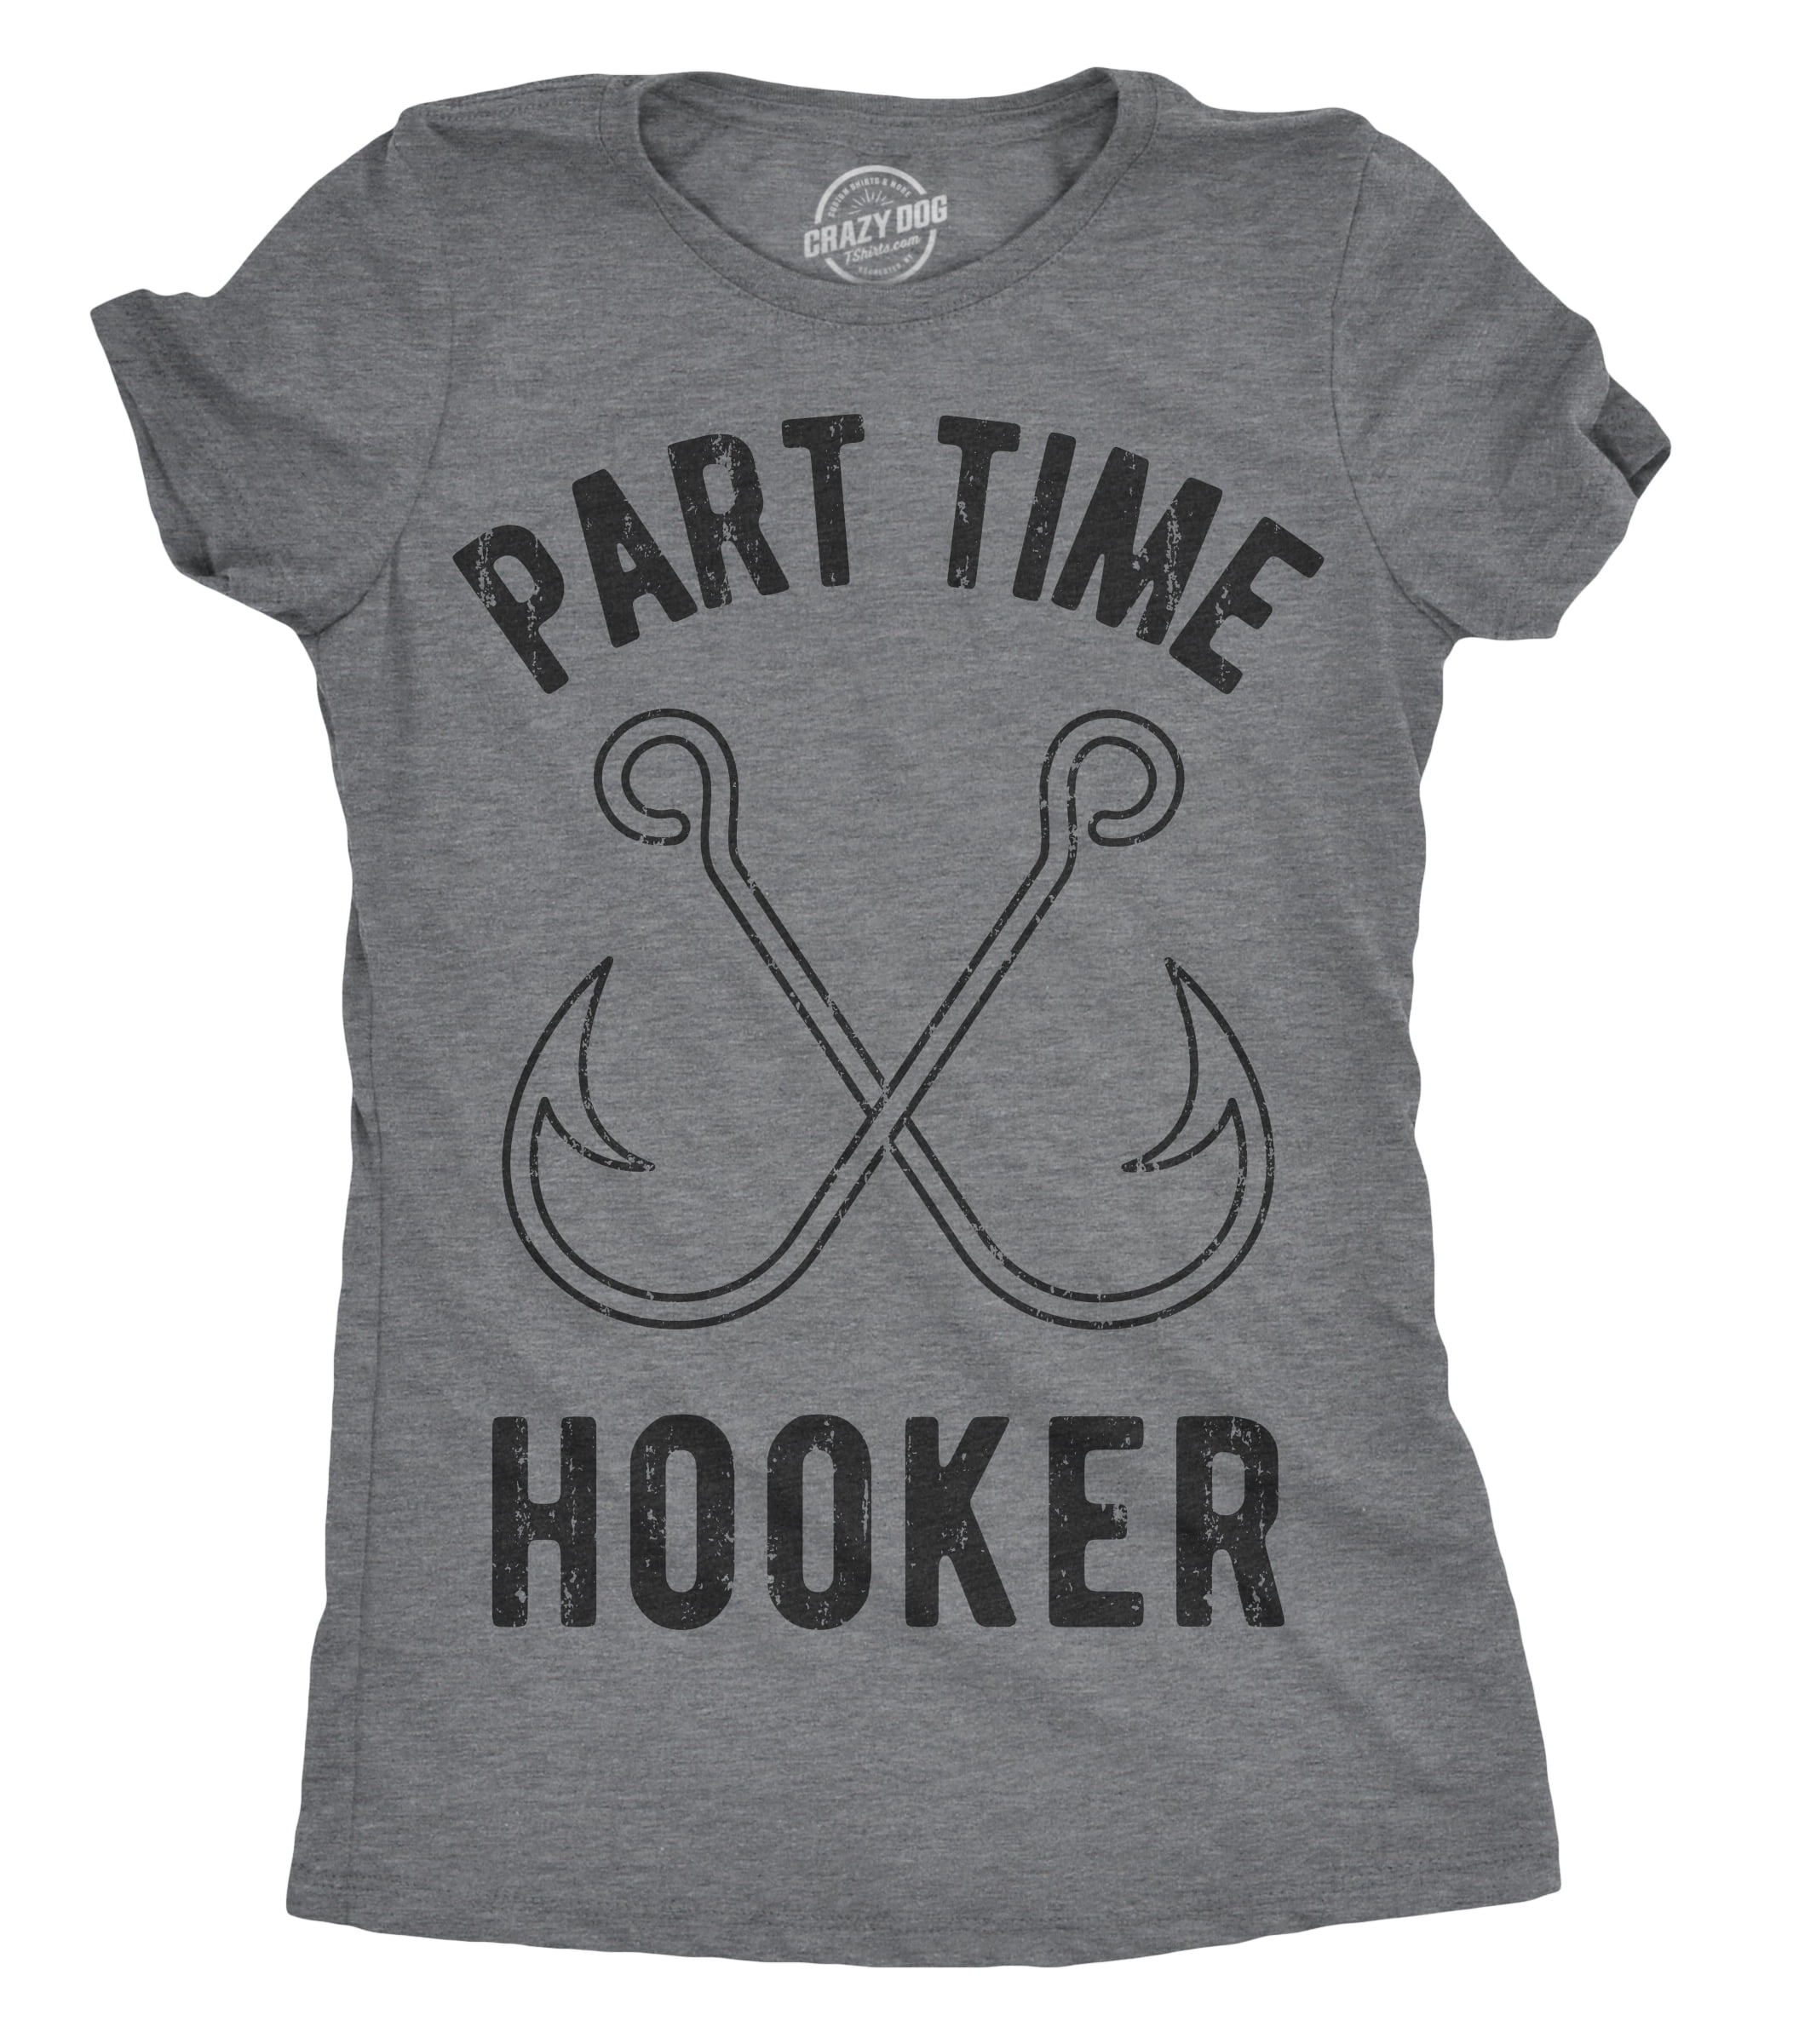 Womens Part Time Hooker Tshirt Funny Outdoor Fishing Tee For Ladies (Dark  Heather Grey) - M Womens Graphic Tees 